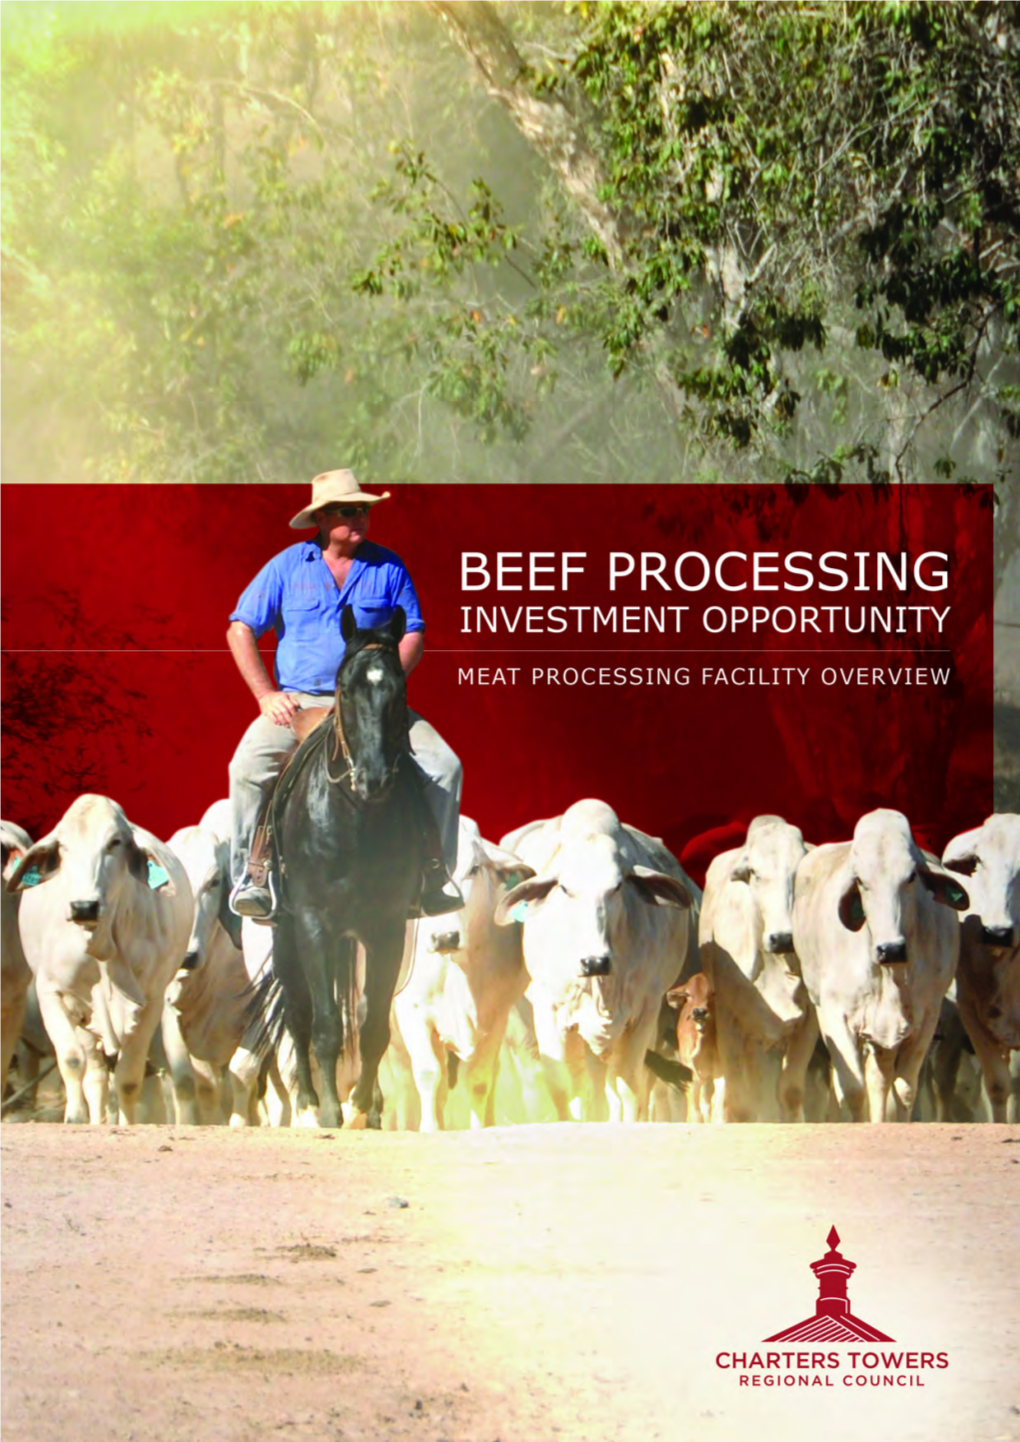 Charters Towers Meat Processing Facility Overview 2020